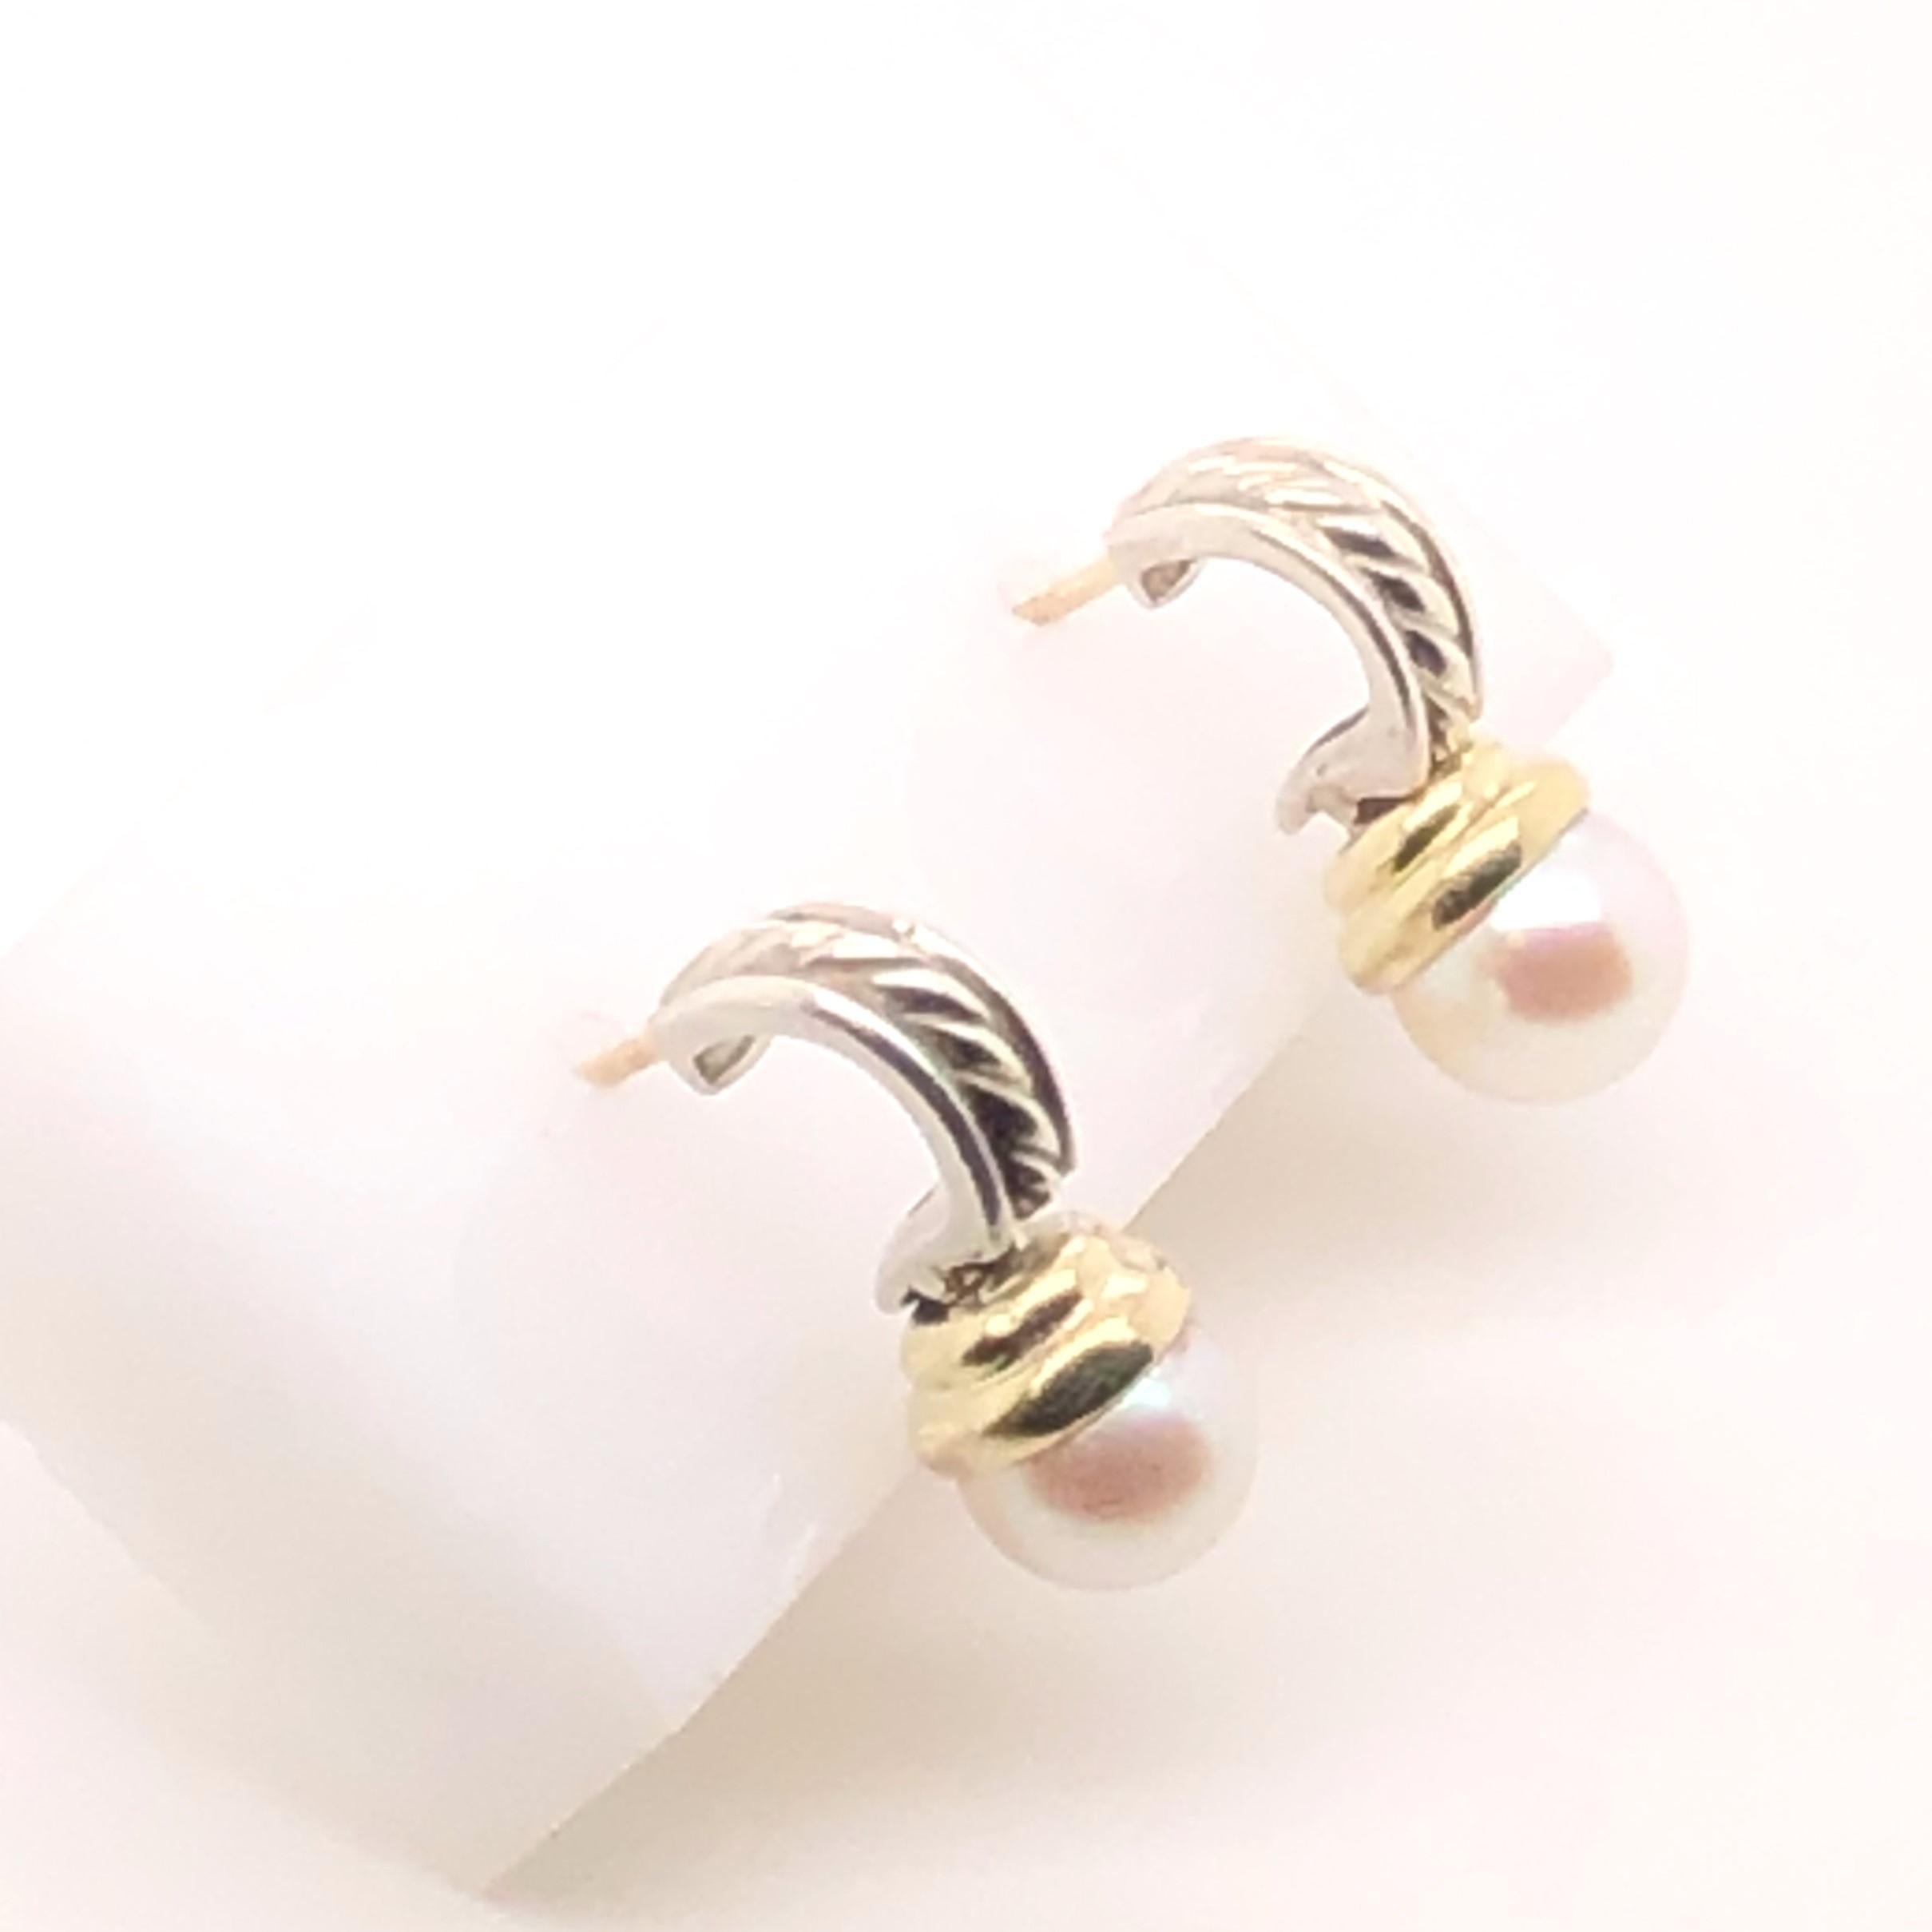 Sterling Silver with 18kt yellow gold David Yurman earrings with round white pearls. The top portion is a half hoop with the inside and outside of polished silver and David Yurman's classic cable inside. Suspended from the half hoops are one each